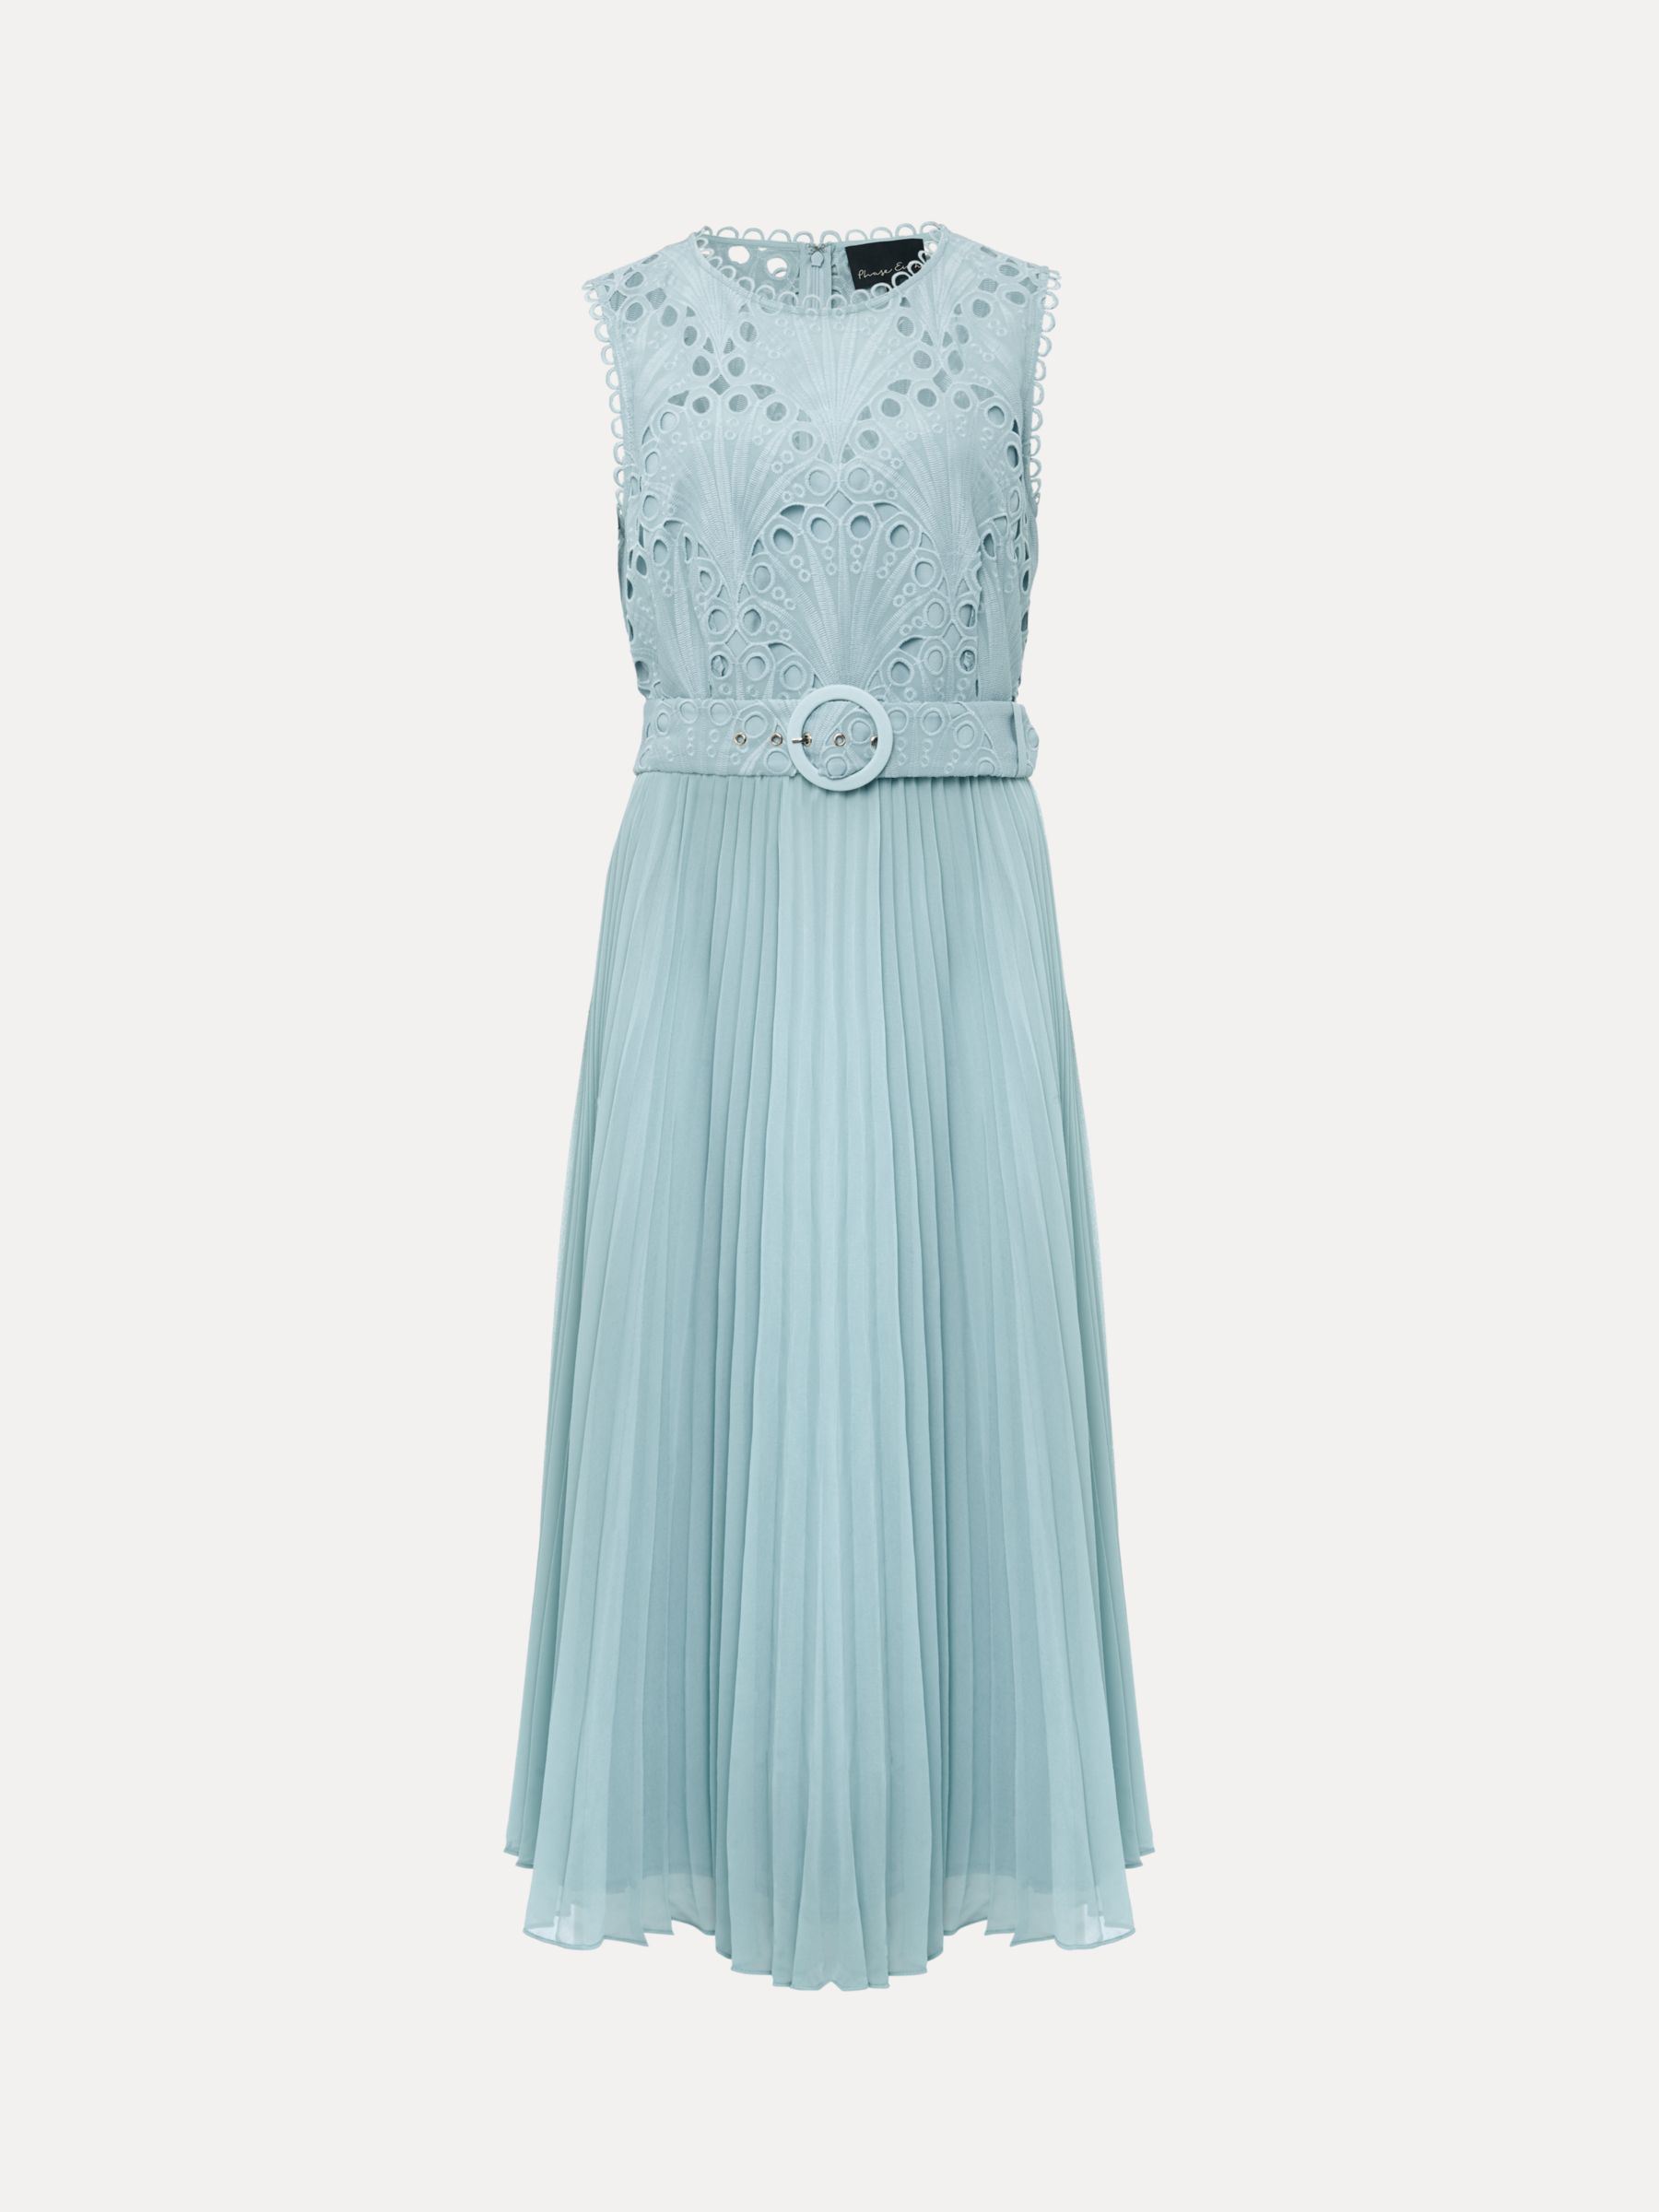 Buy Phase Eight Petite Amora Lace Bodice Dress, Peppermint Online at johnlewis.com